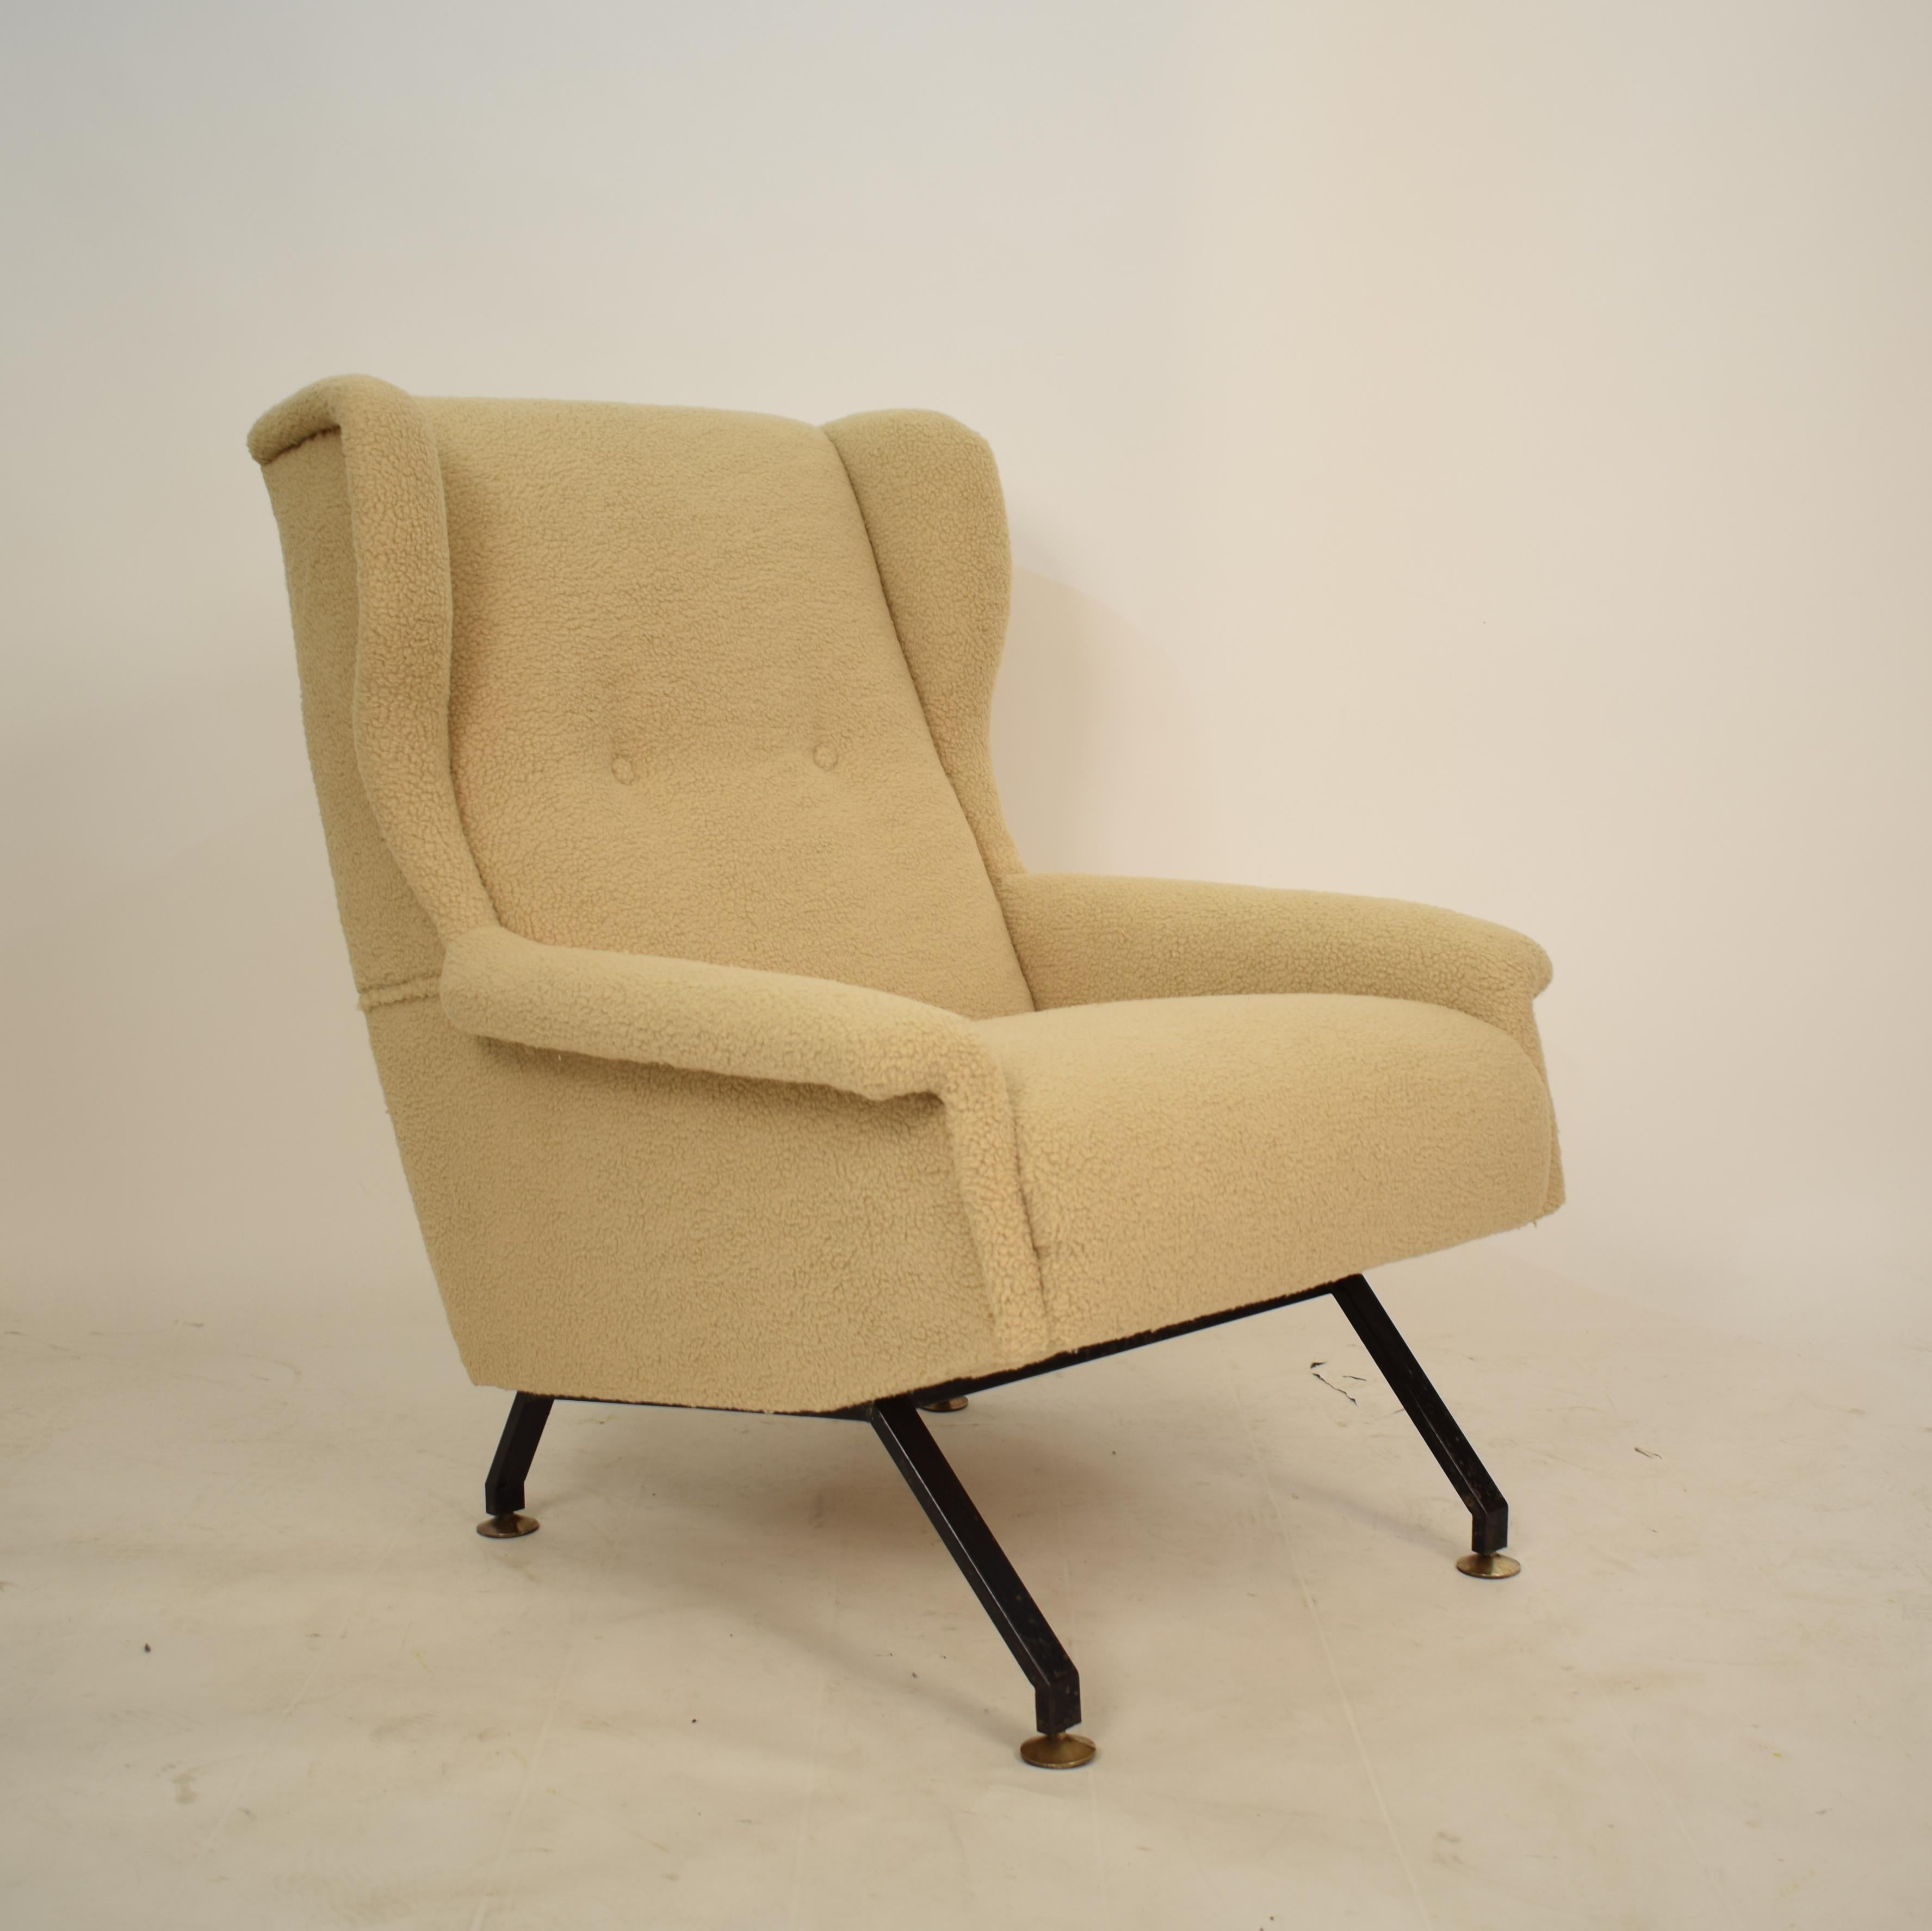 This beautiful midcentury Italian armchair or lounge chair was recently reupholstered in sandy or beige sheep wool fabric. It was made in the 1950s in Italy.
The legs are on a black lacquered metal base with brass endings.
A unique piece which is